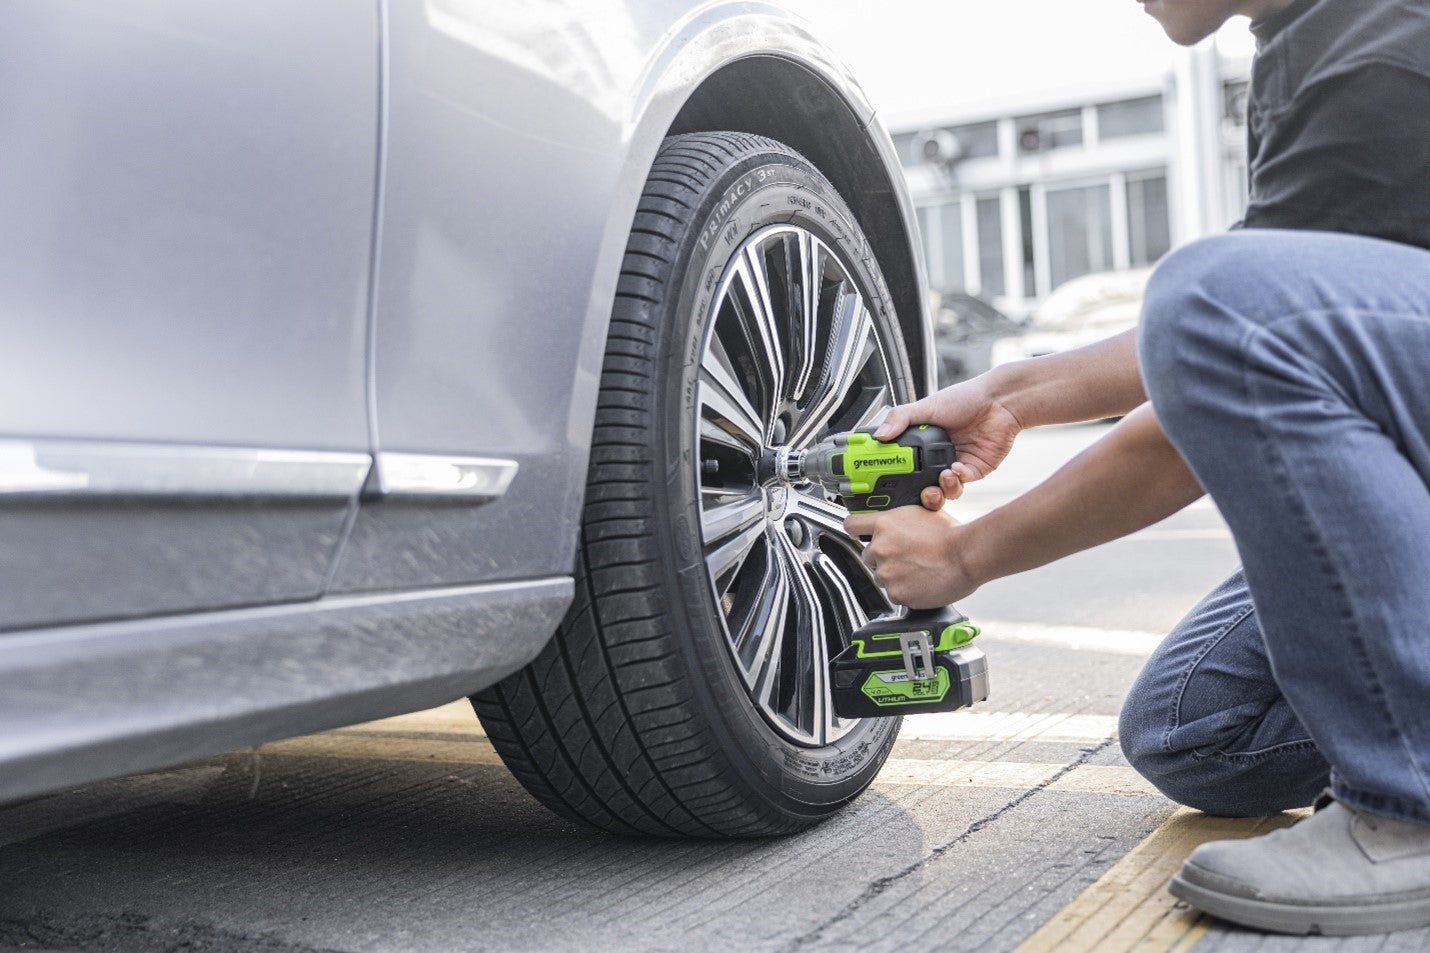 impact-wrench-to-change-tires